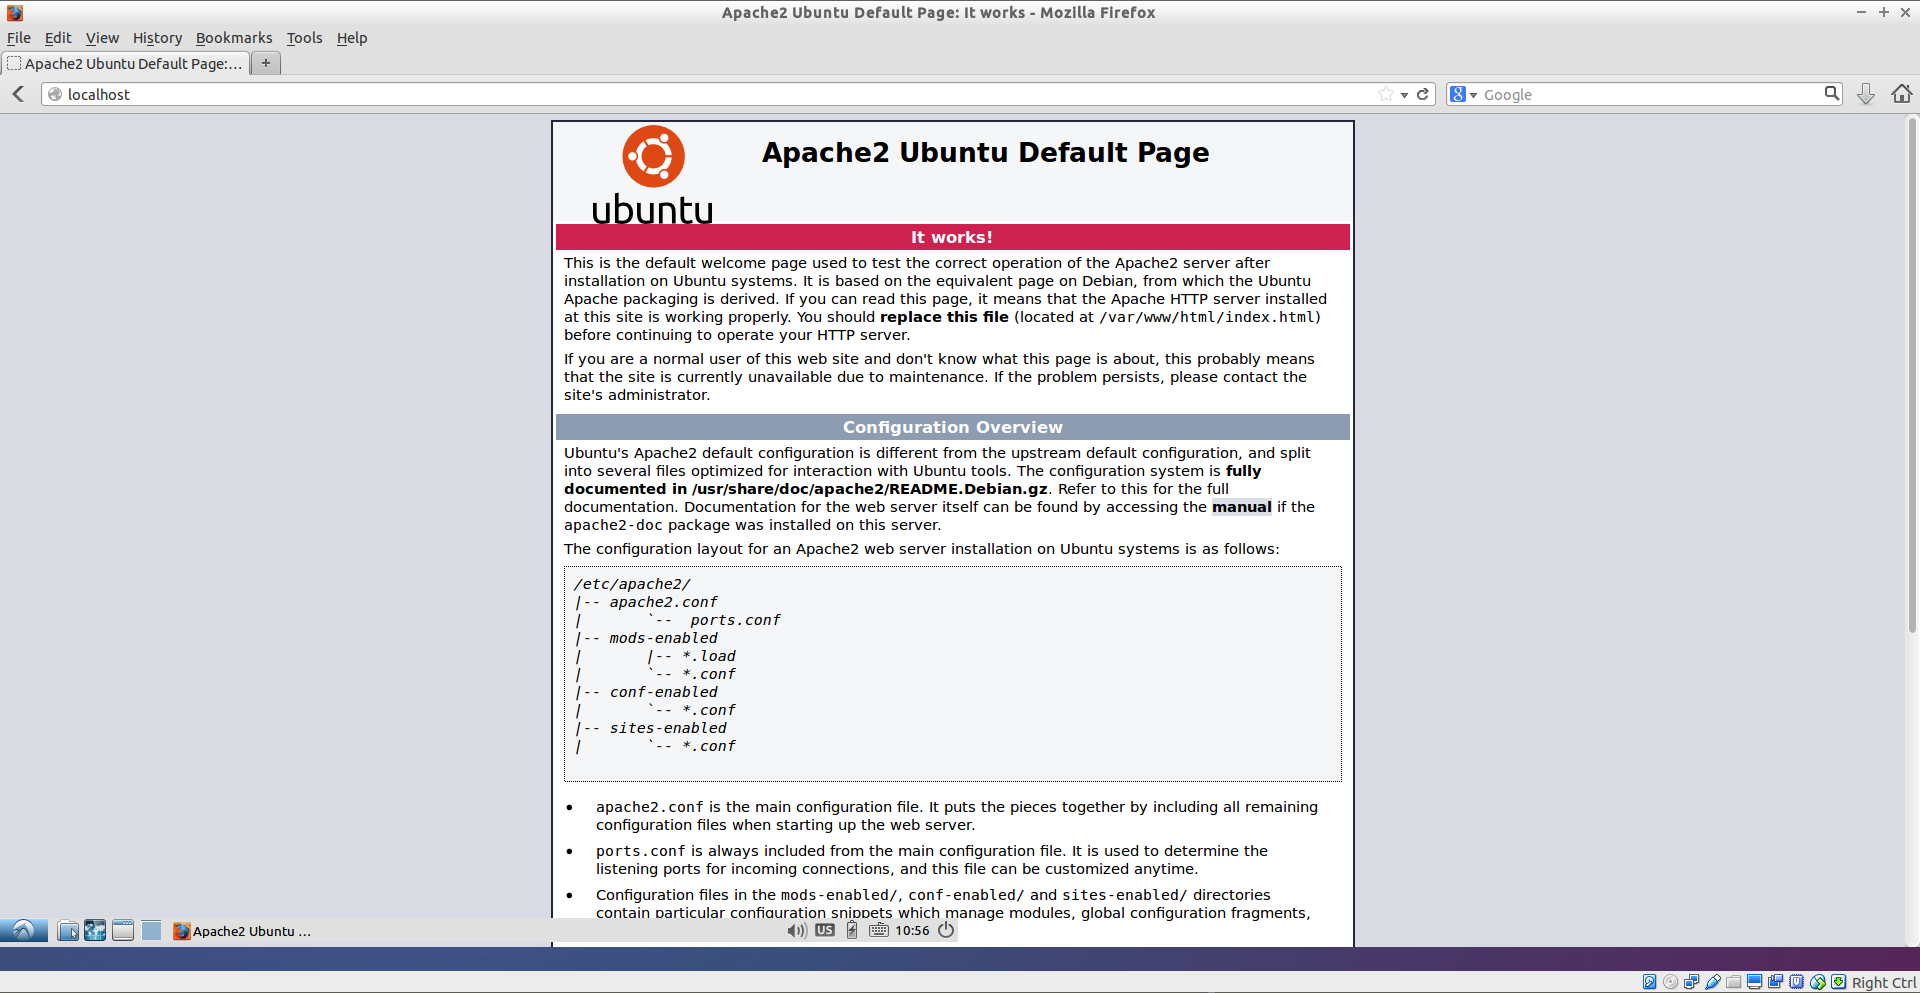 _images/apache1.png